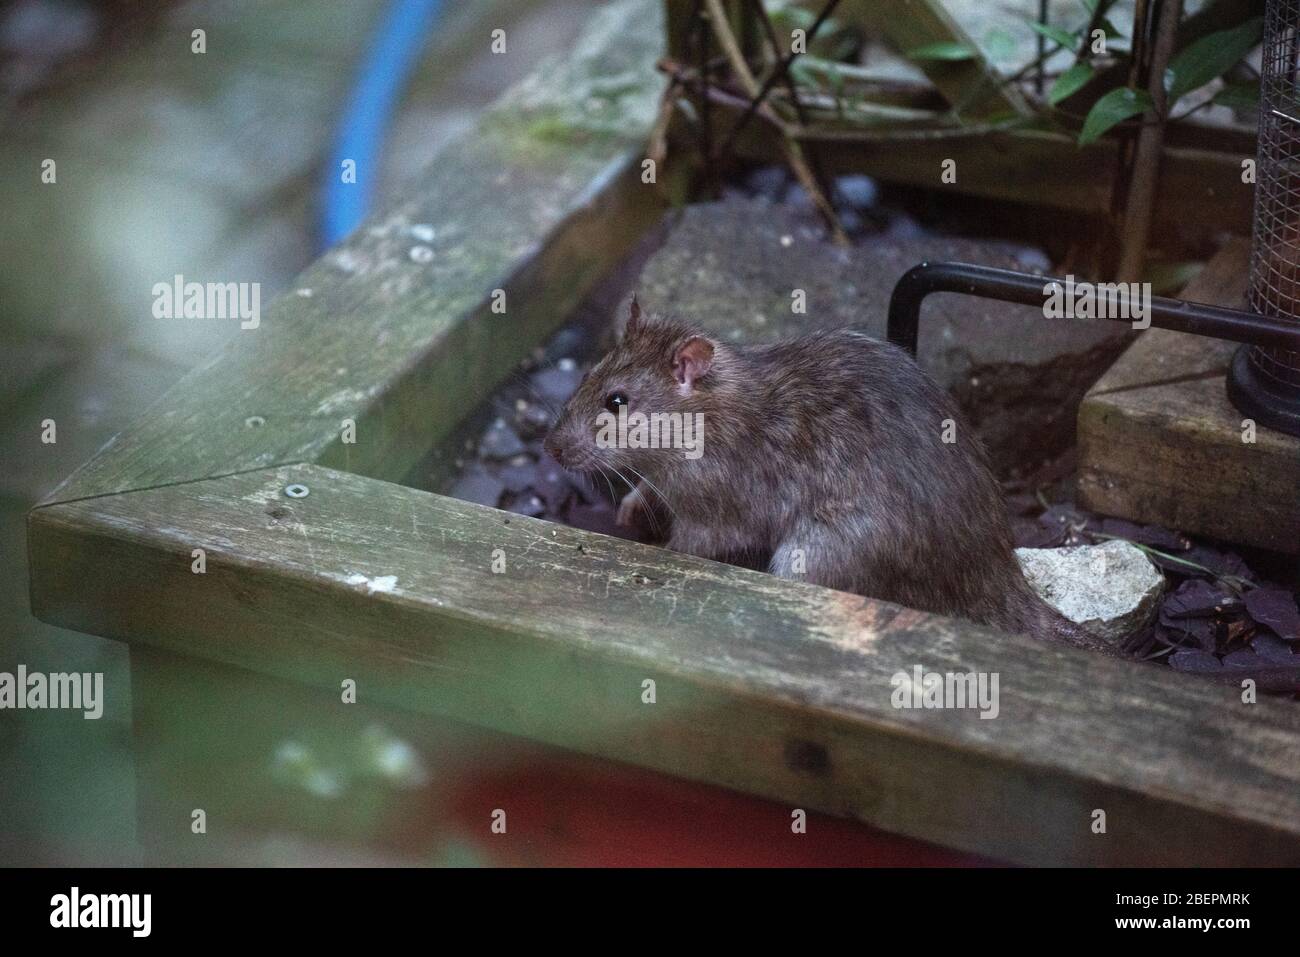 Thaxted Essex England. Brown Rat in photographers garden. April 2020 Wikipedia below: The brown rat (Rattus norvegicus), also known as the common rat, Stock Photo